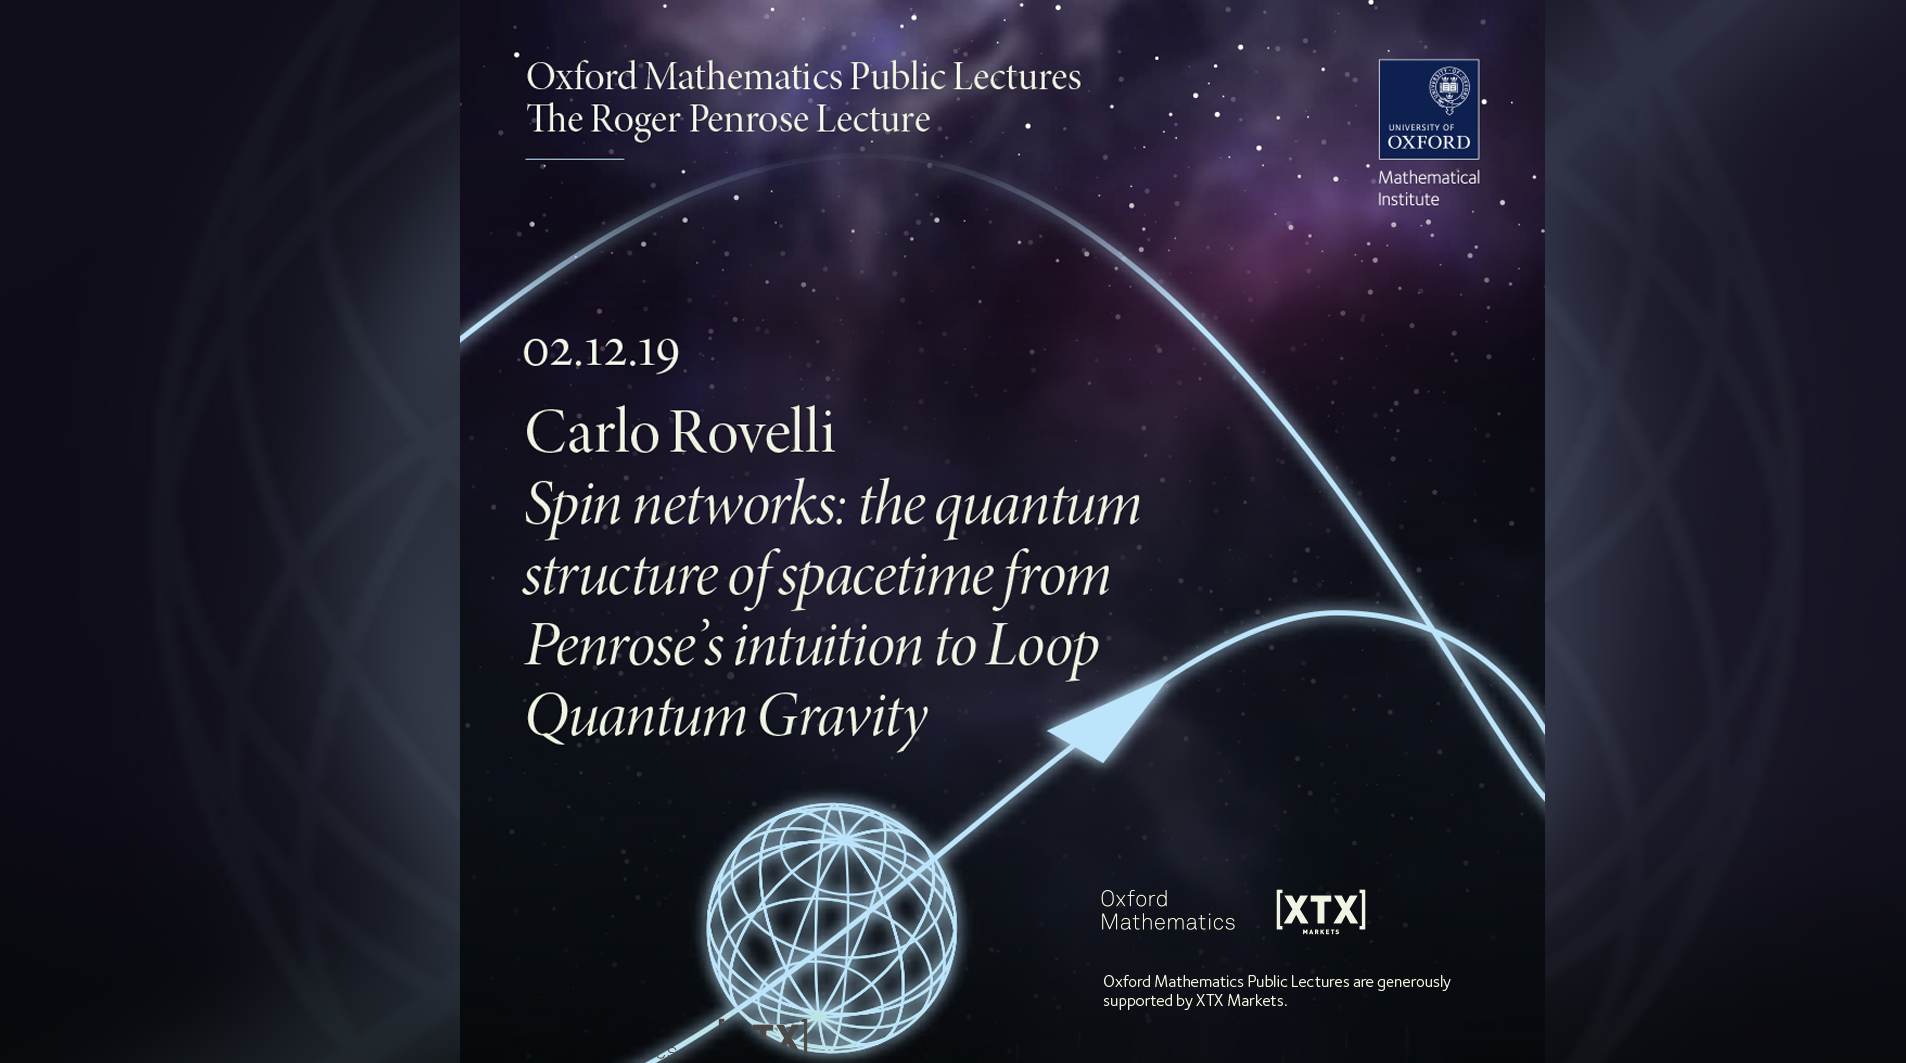 Lectures Bureau  Does time exist? Carlo Rovelli and the quantum